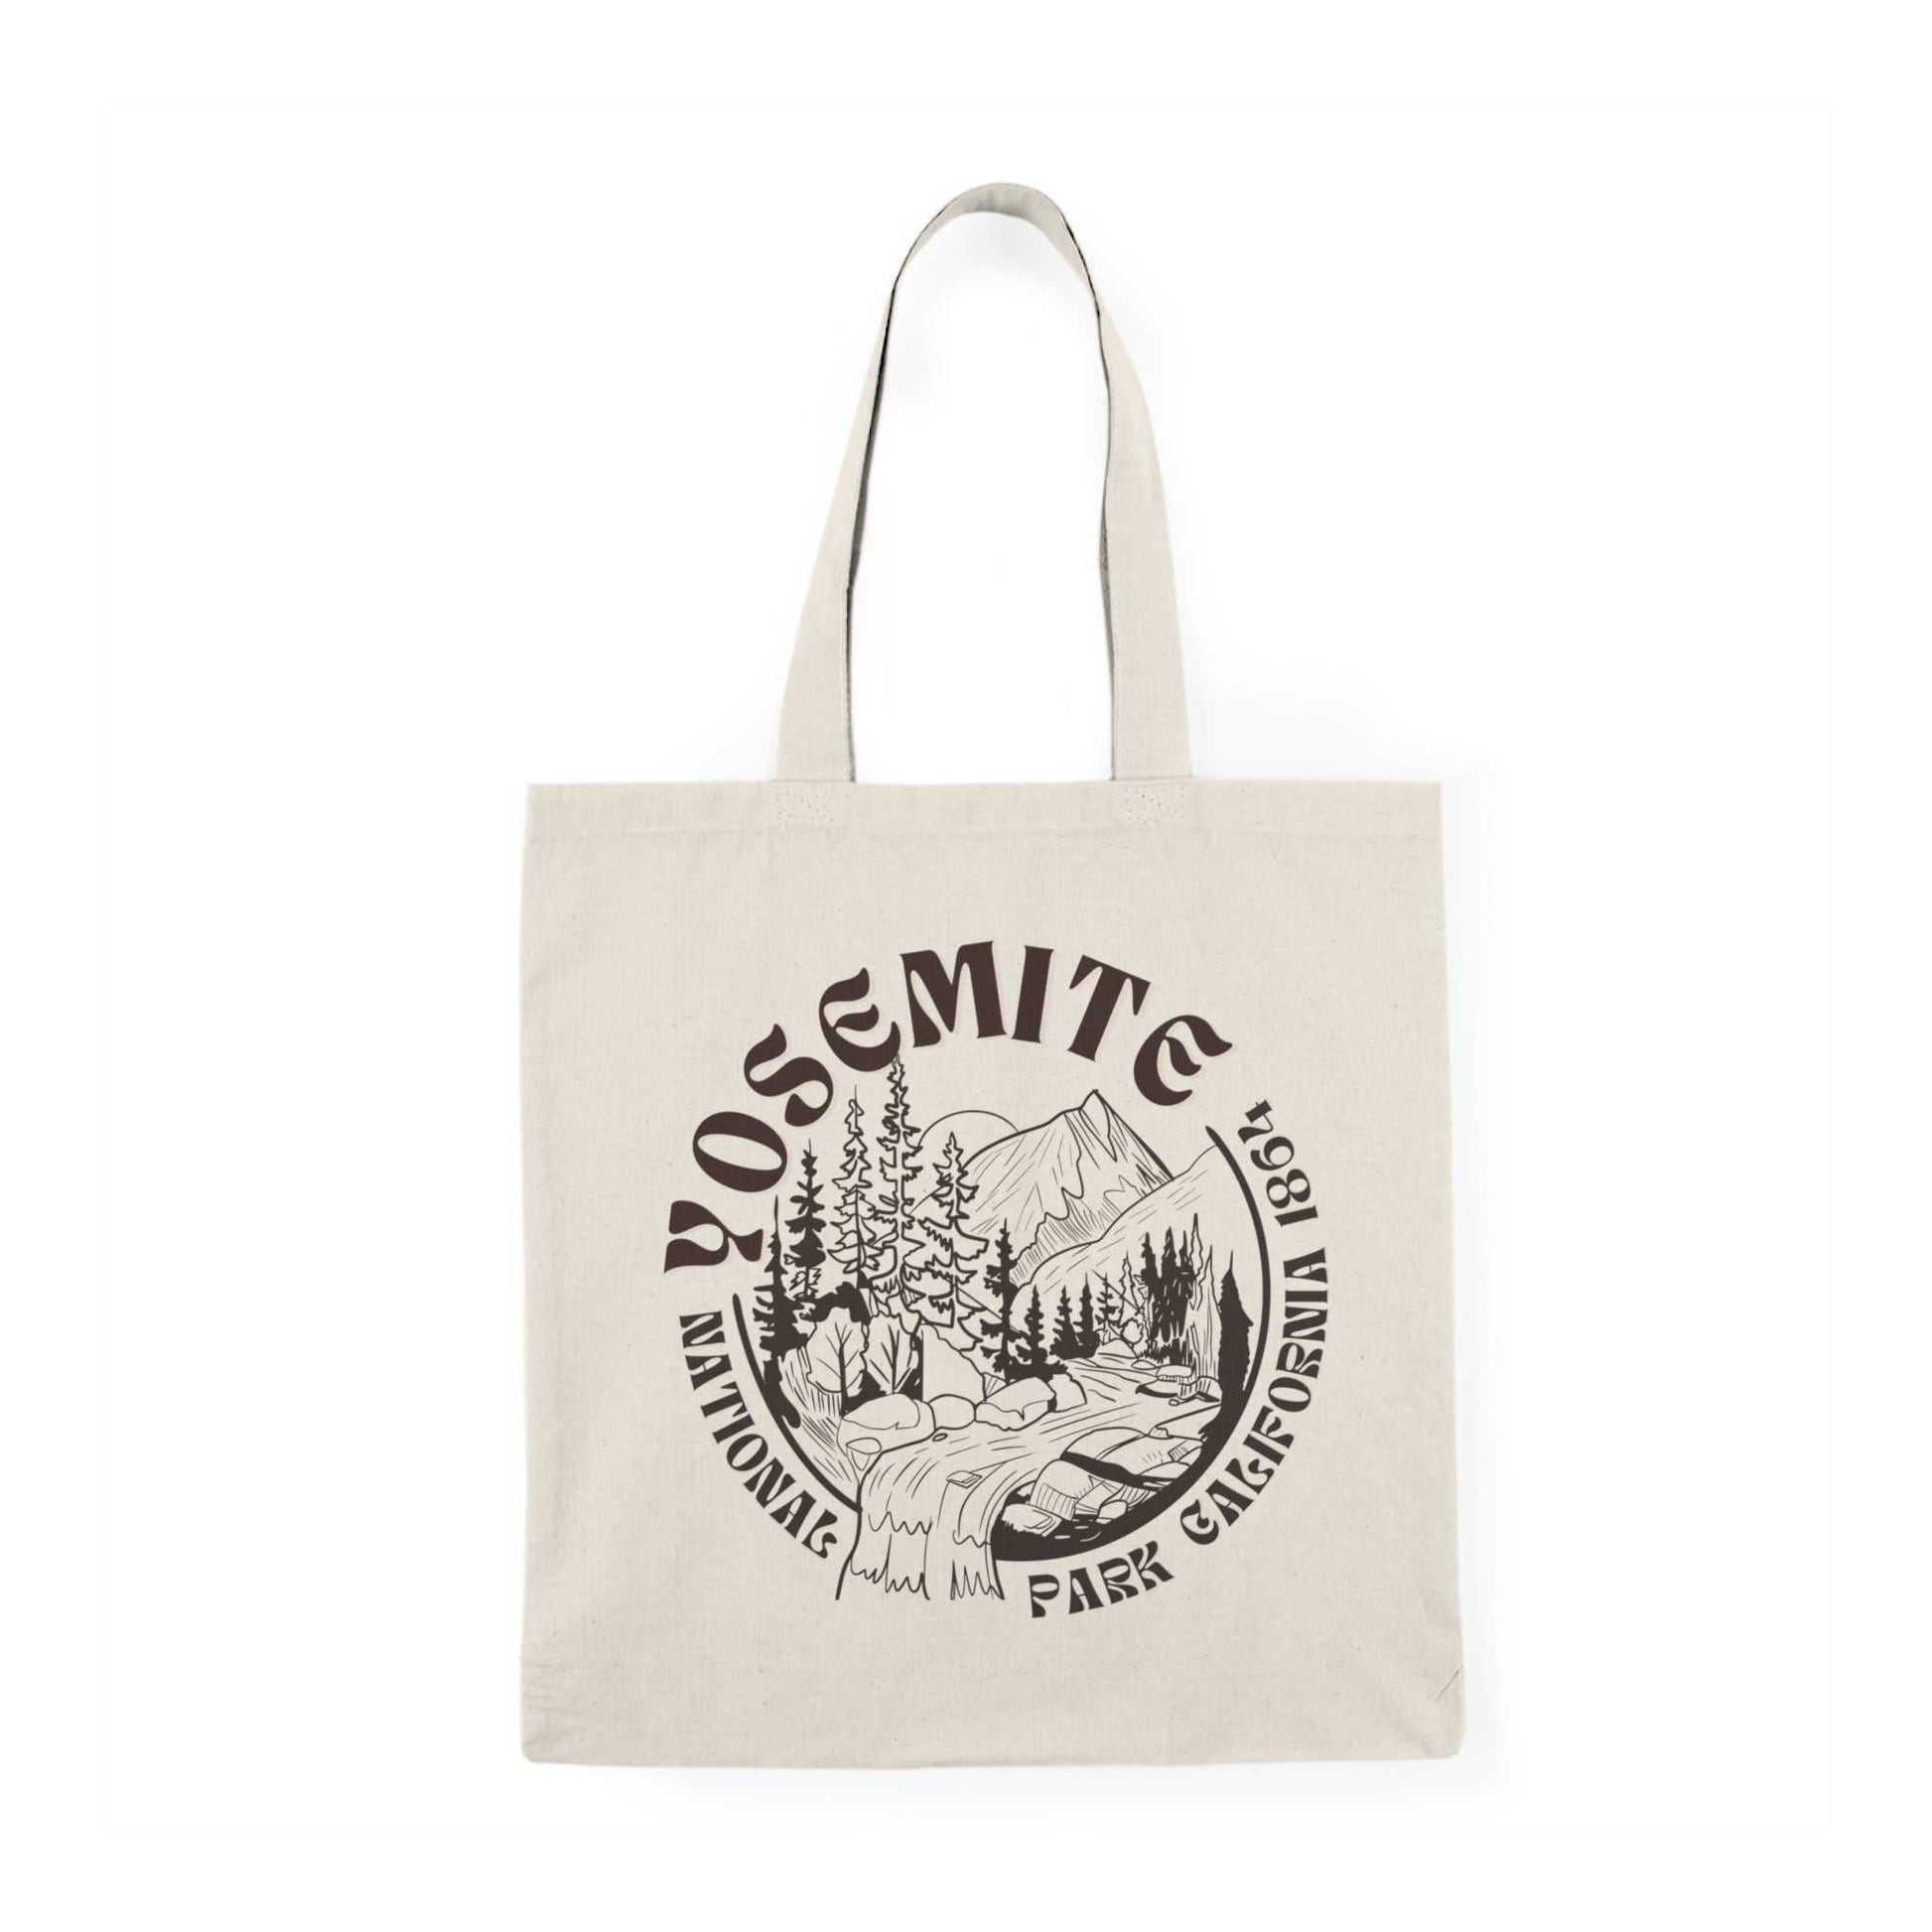 Yosemite National Park ToteDetails:
- 15.75"h x 15.25"w- handle length of 21.5”- made with 100% recycled cotton sheeting- reinforced handle stitching- lightweight and compact
 
The Lincoln For